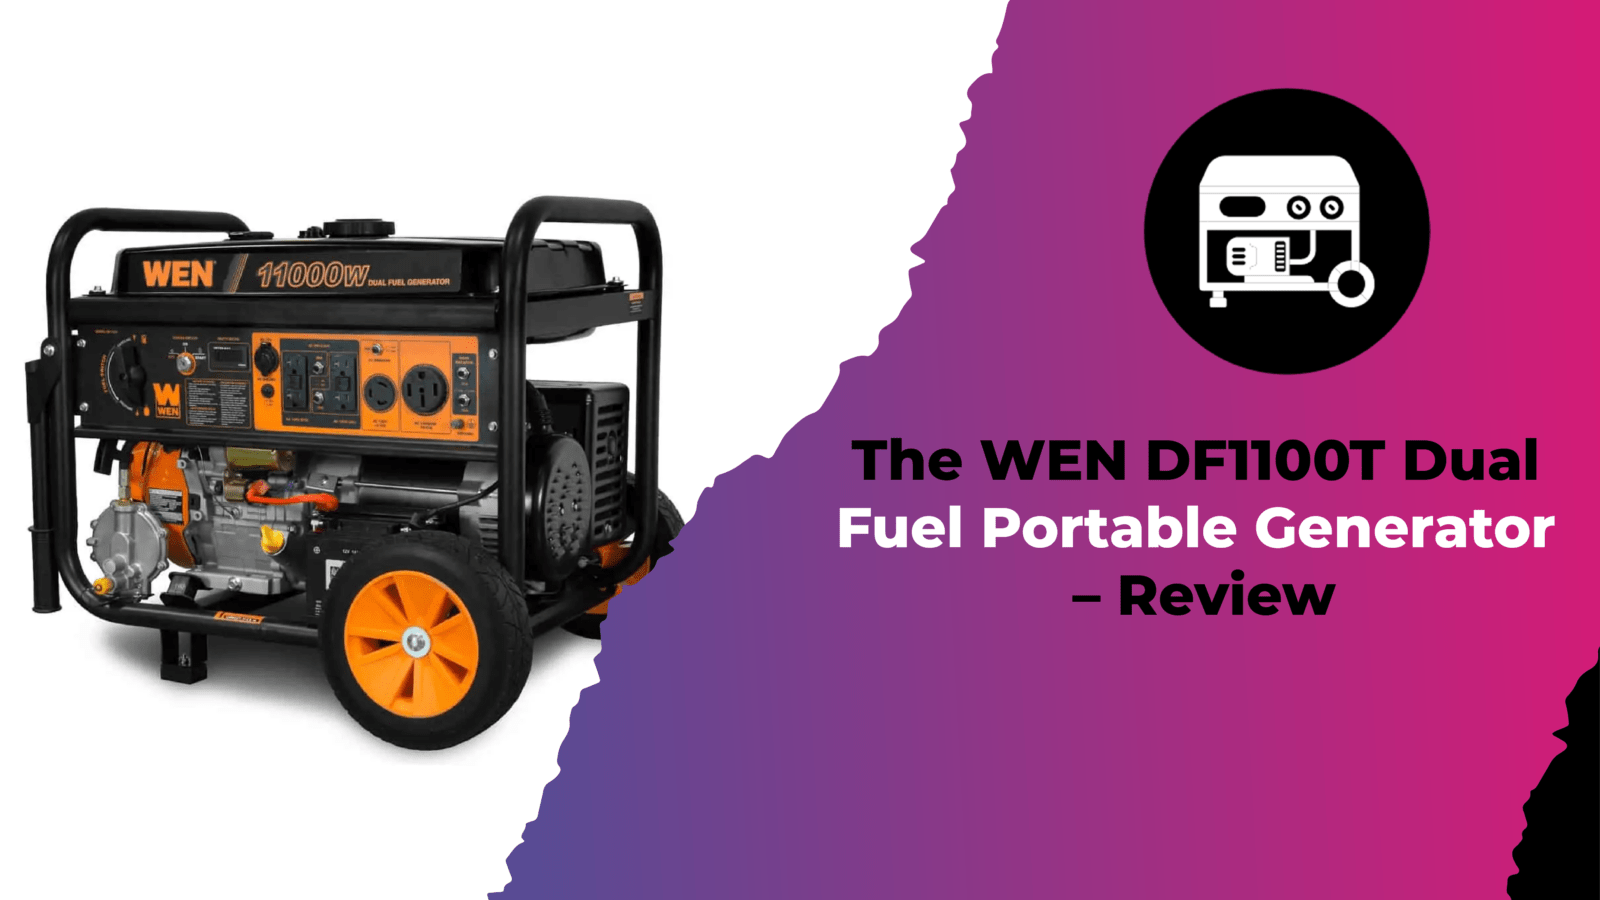 The WEN DF1100T Dual Fuel Portable Generator – Review